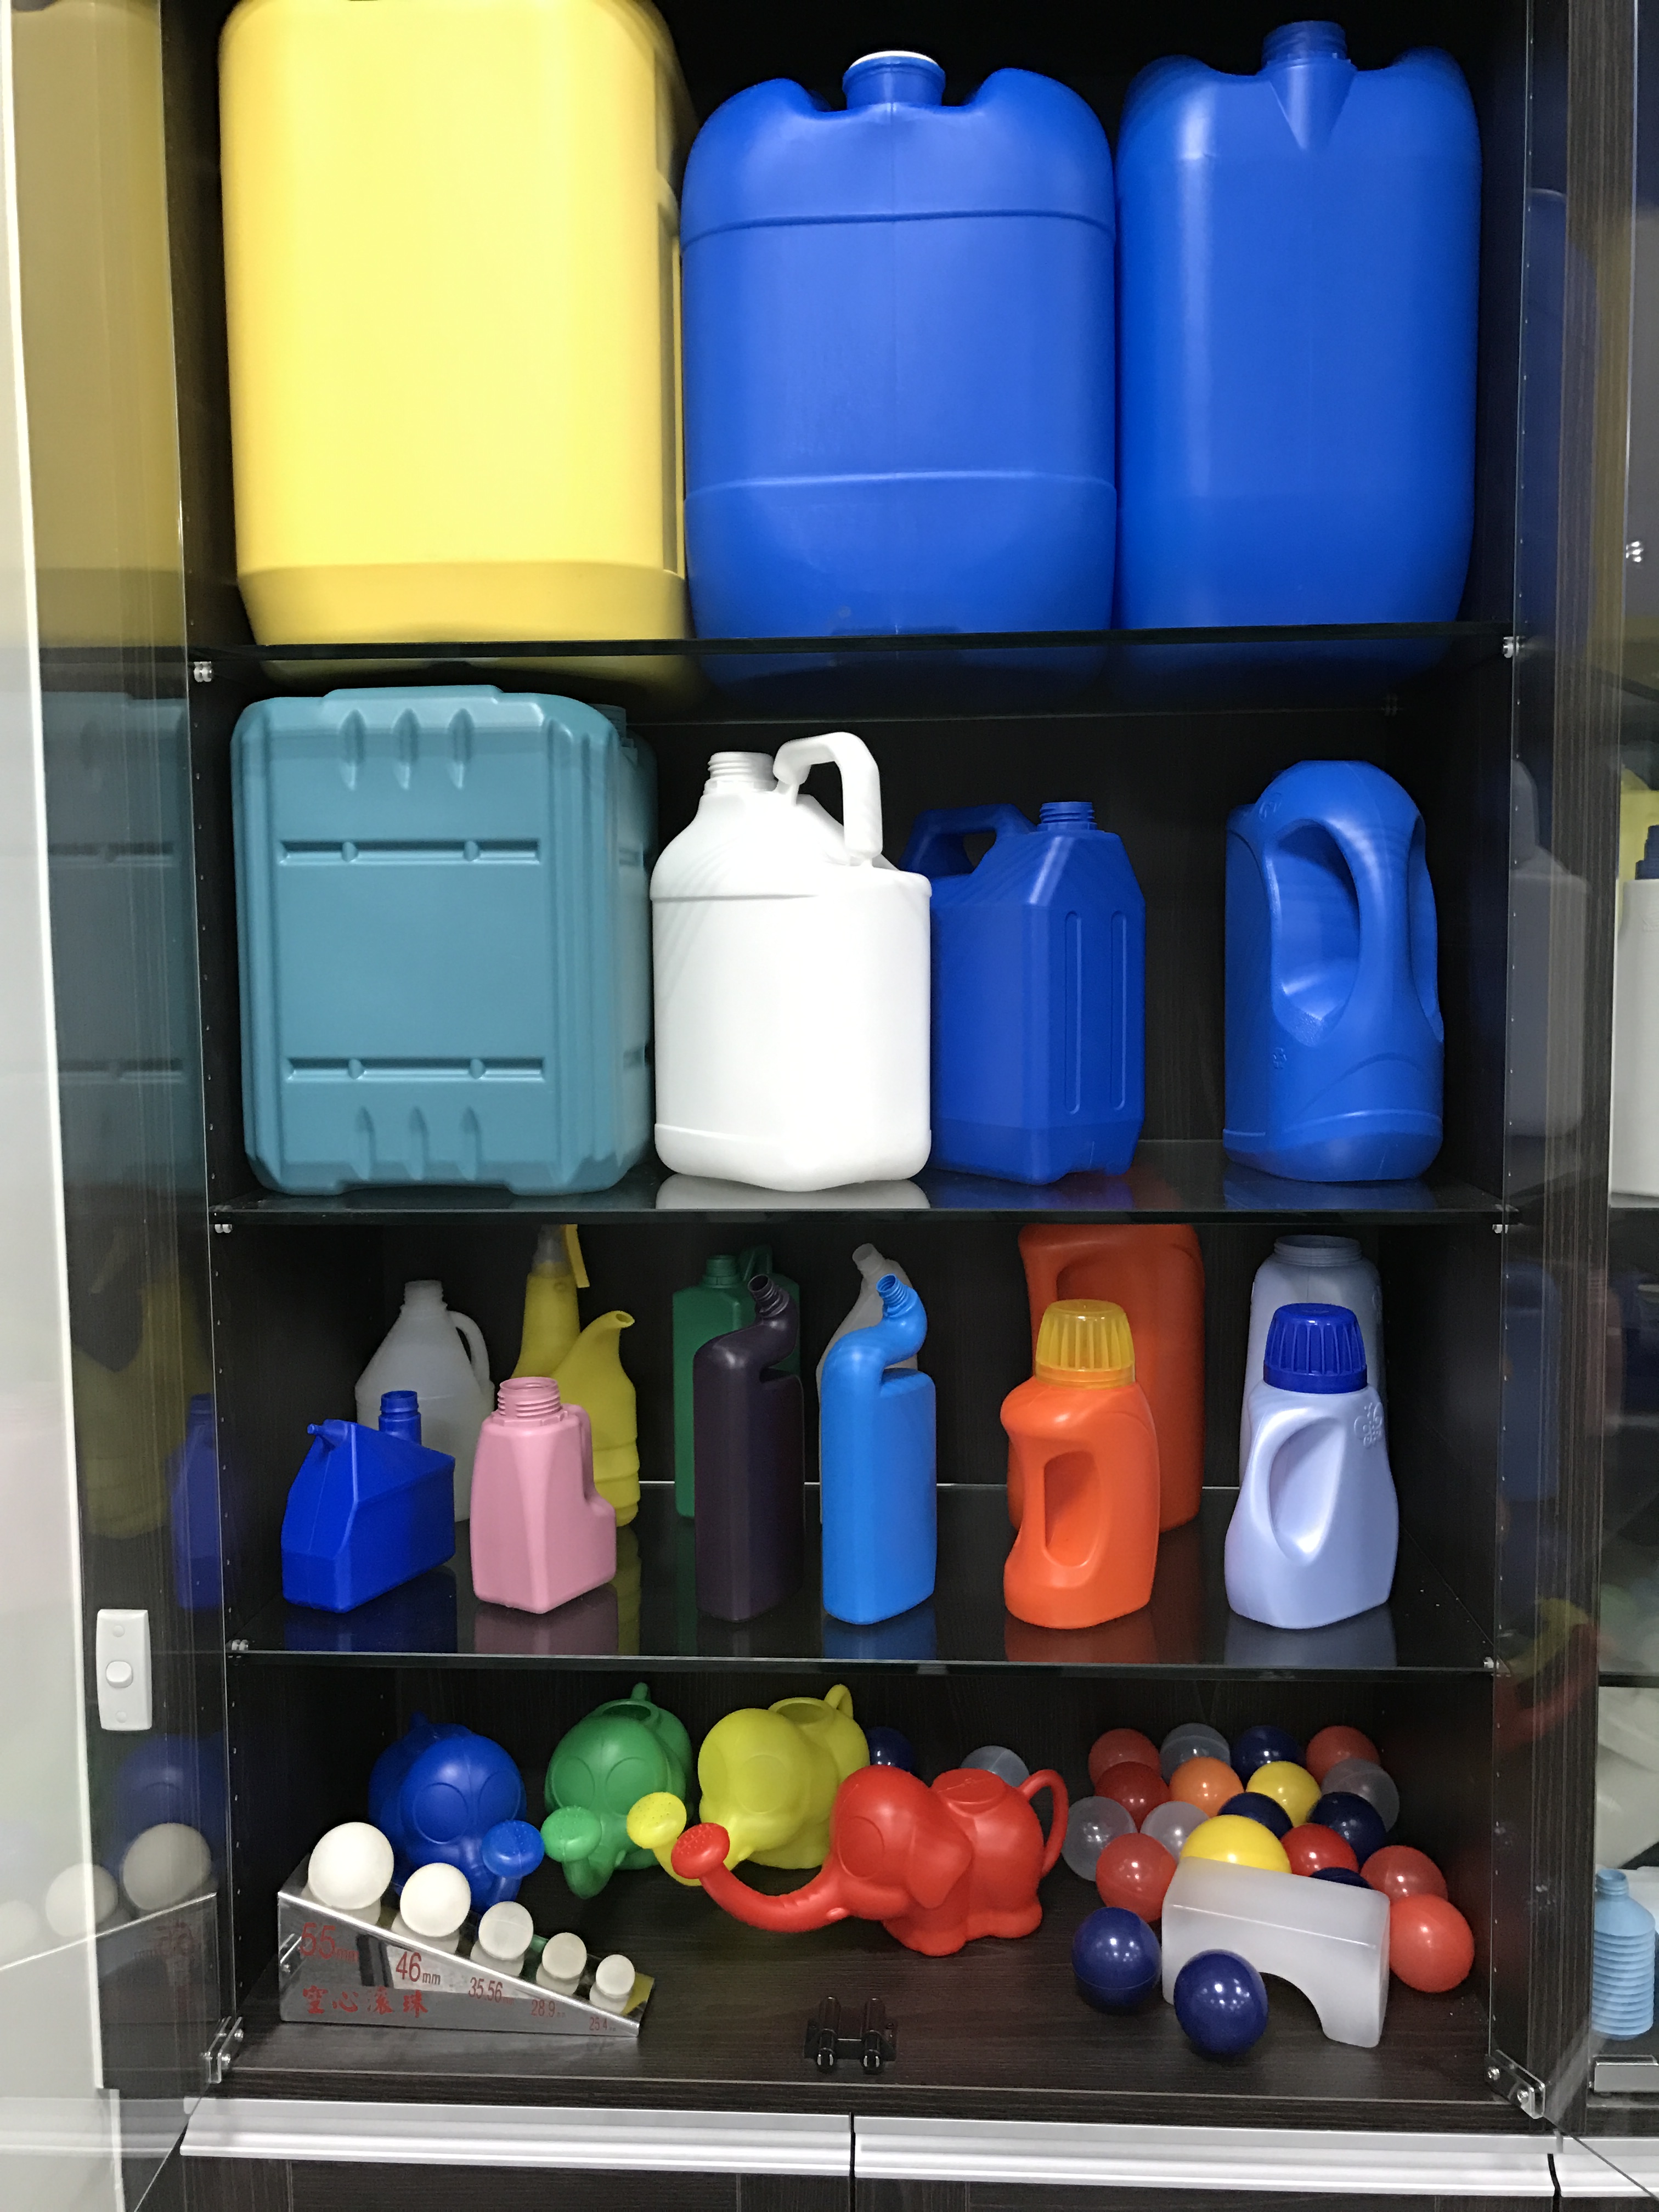 New plastic products